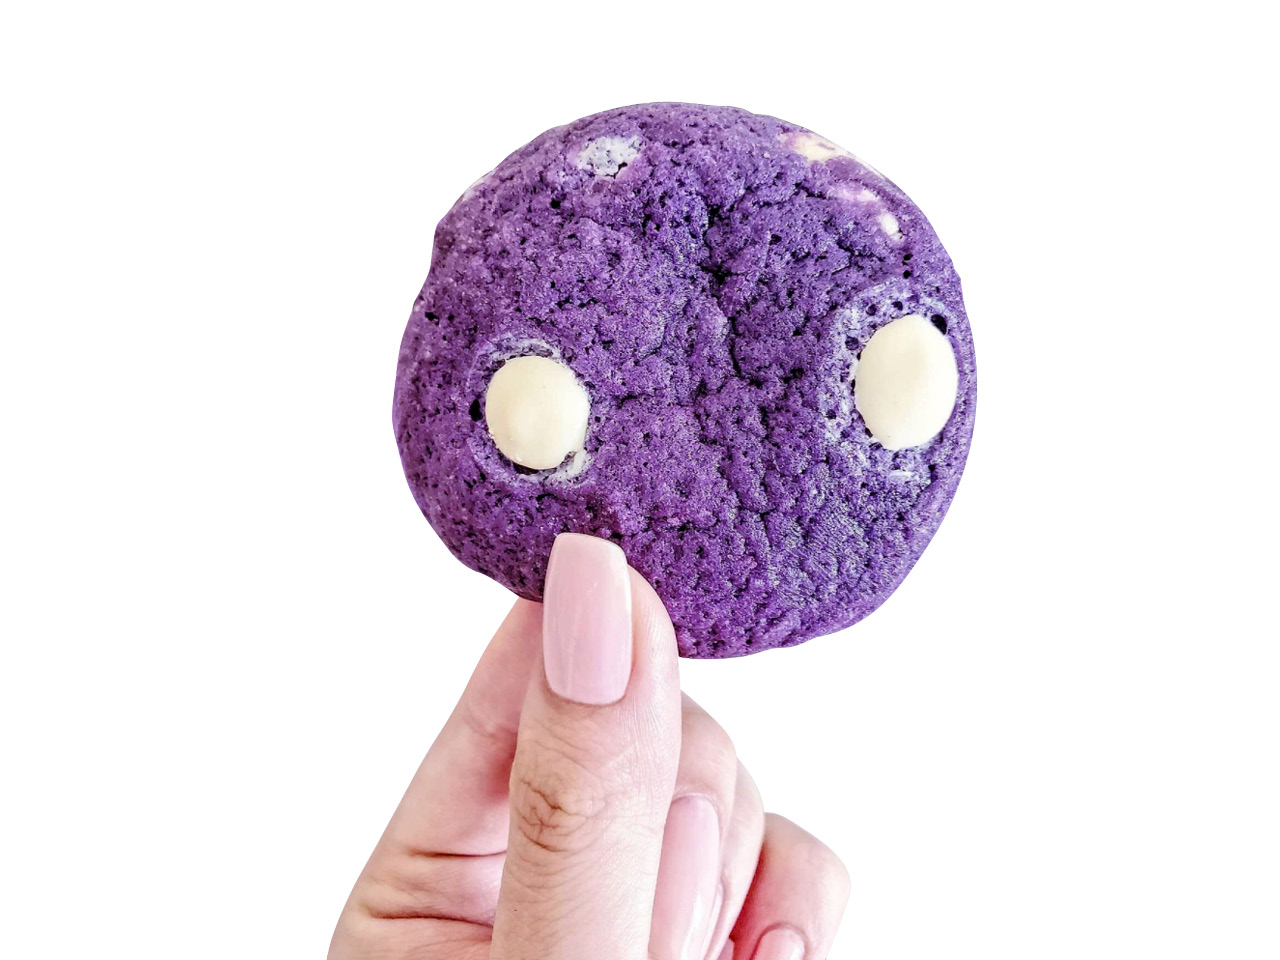 A closeup of part of a hand holding a purple cookie with white chocolate chips in it